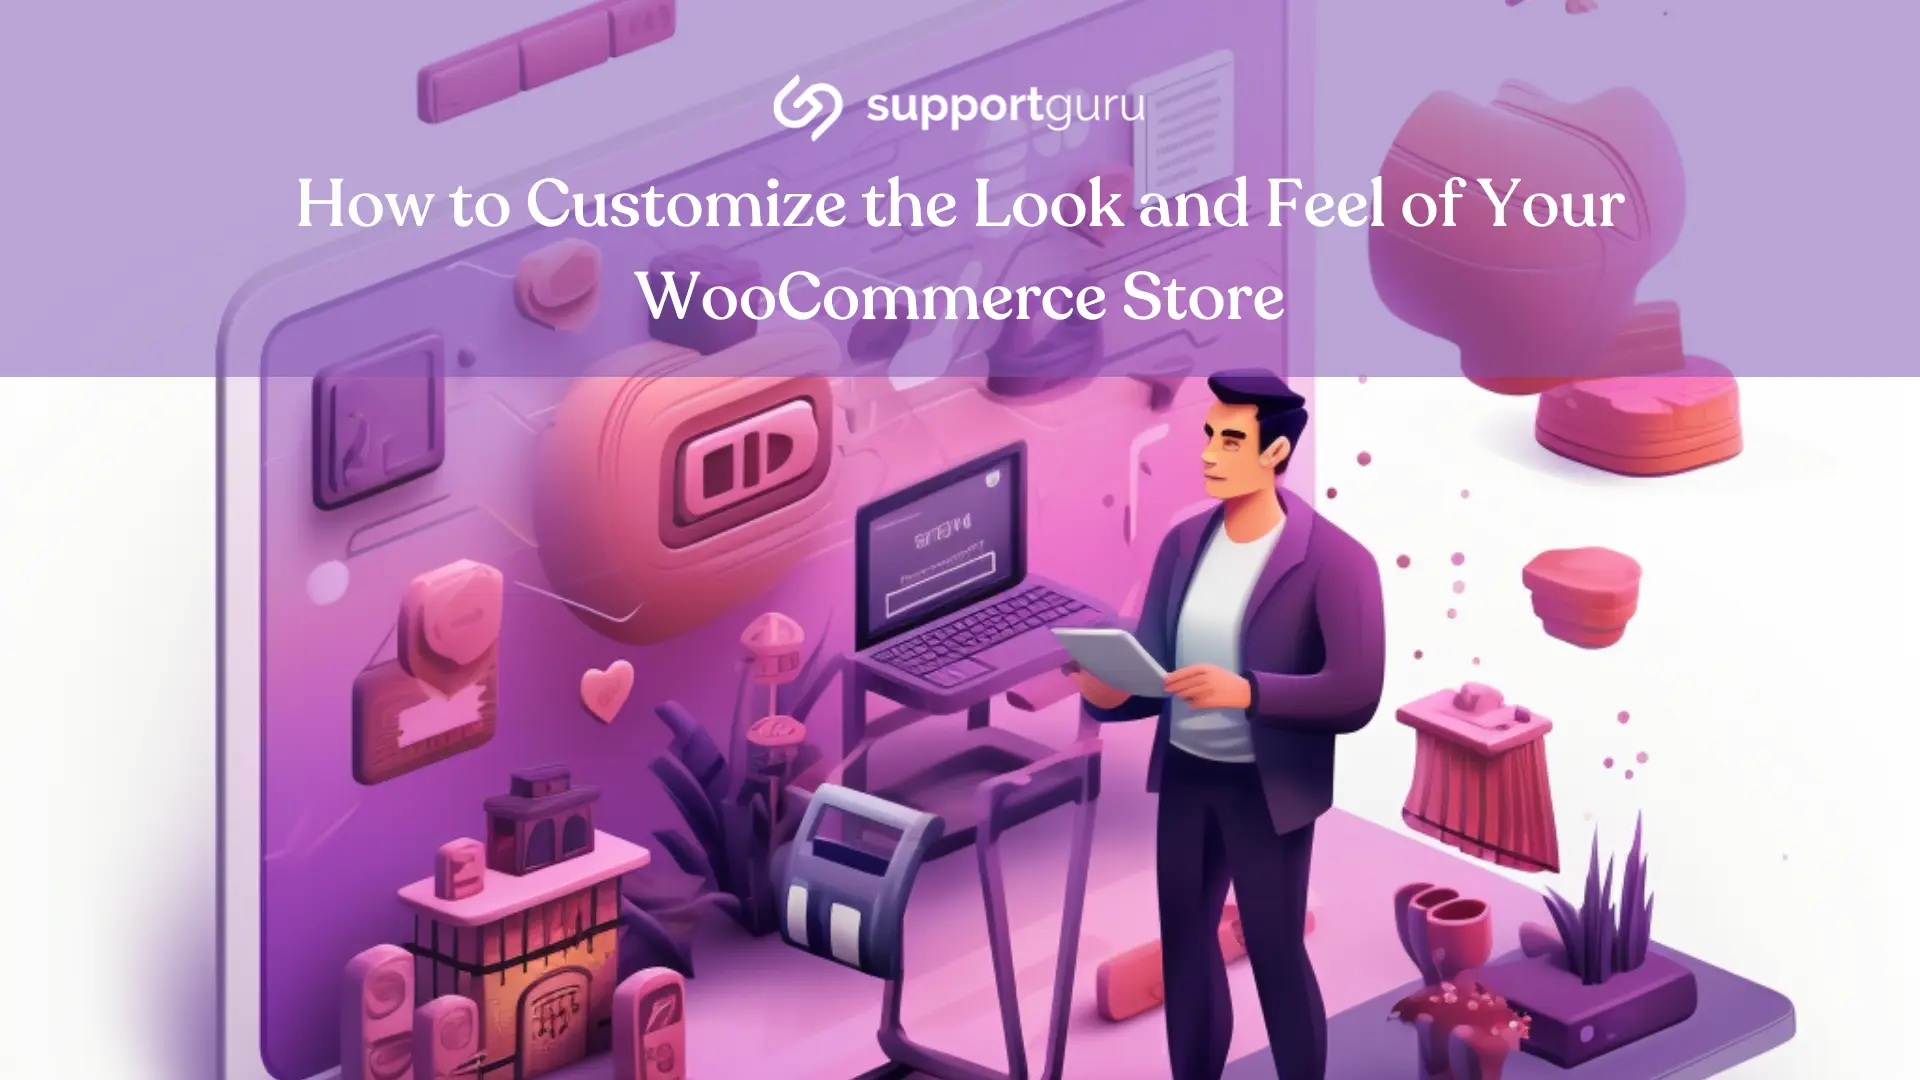 Customize WooCommerce Store with Support Guru, Support Guru WooCommerce, WooCommerce Customization, How to Customize WooCommerce Storefront